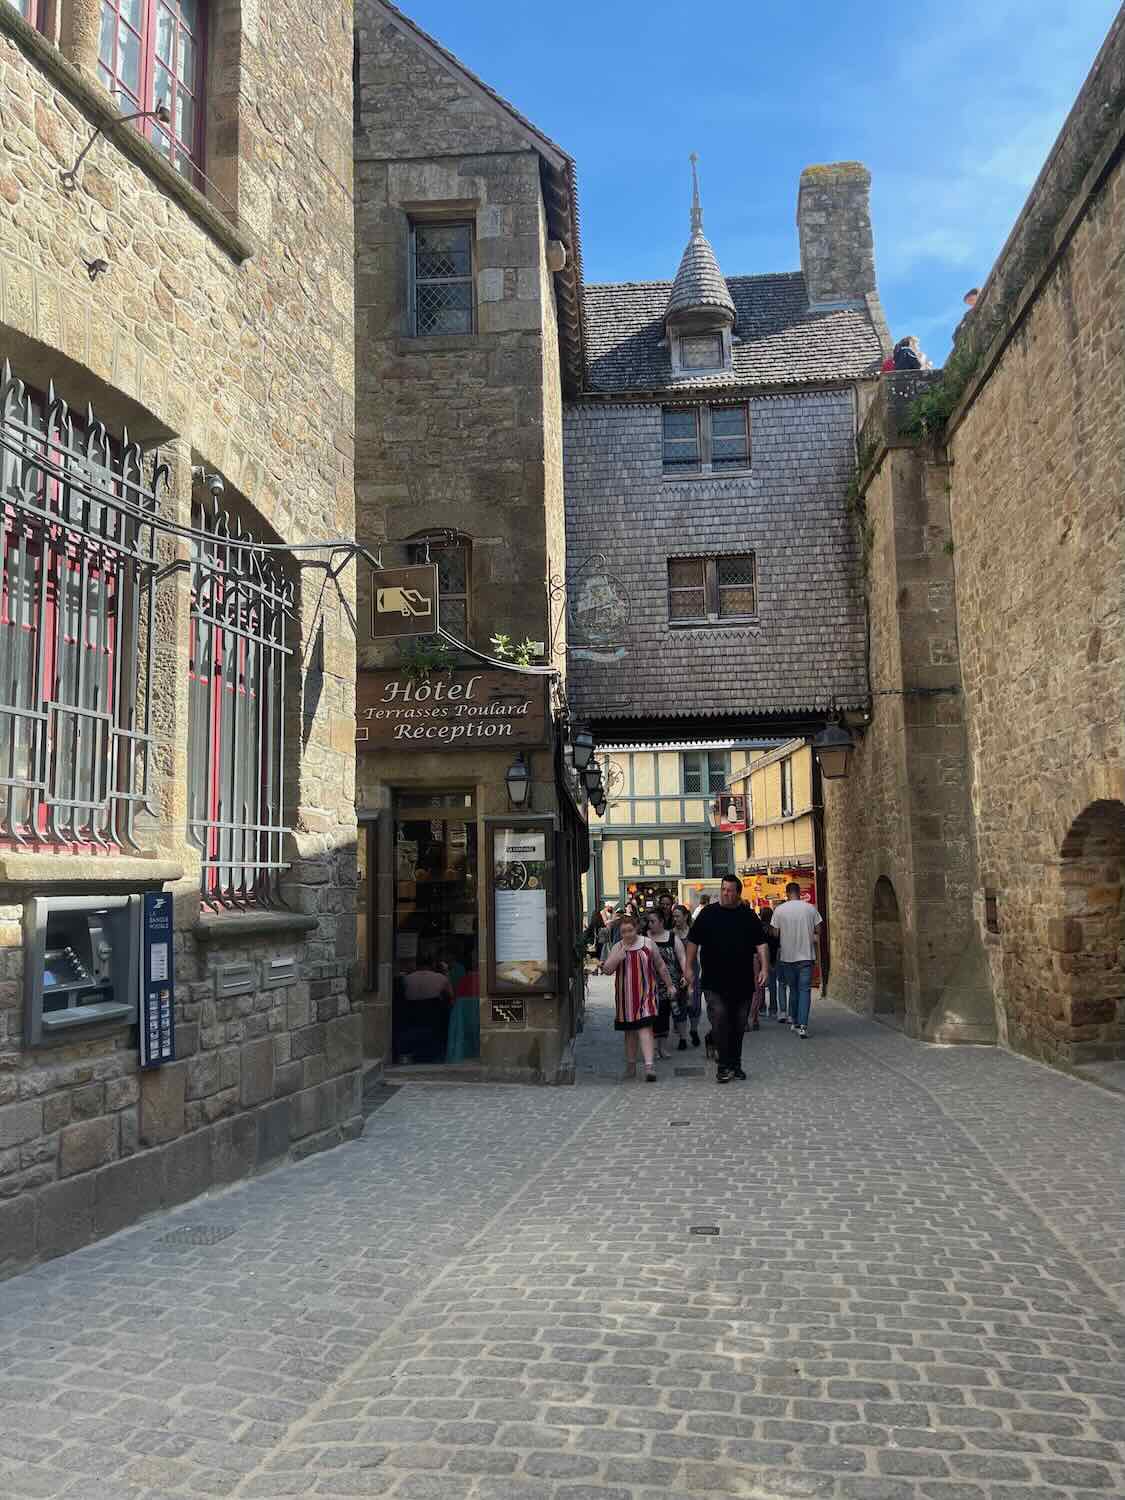 Historic stone buildings line a bustling narrow street in Mont Saint Michel, complete with quaint shop fronts and cobblestones, under a clear blue sky.